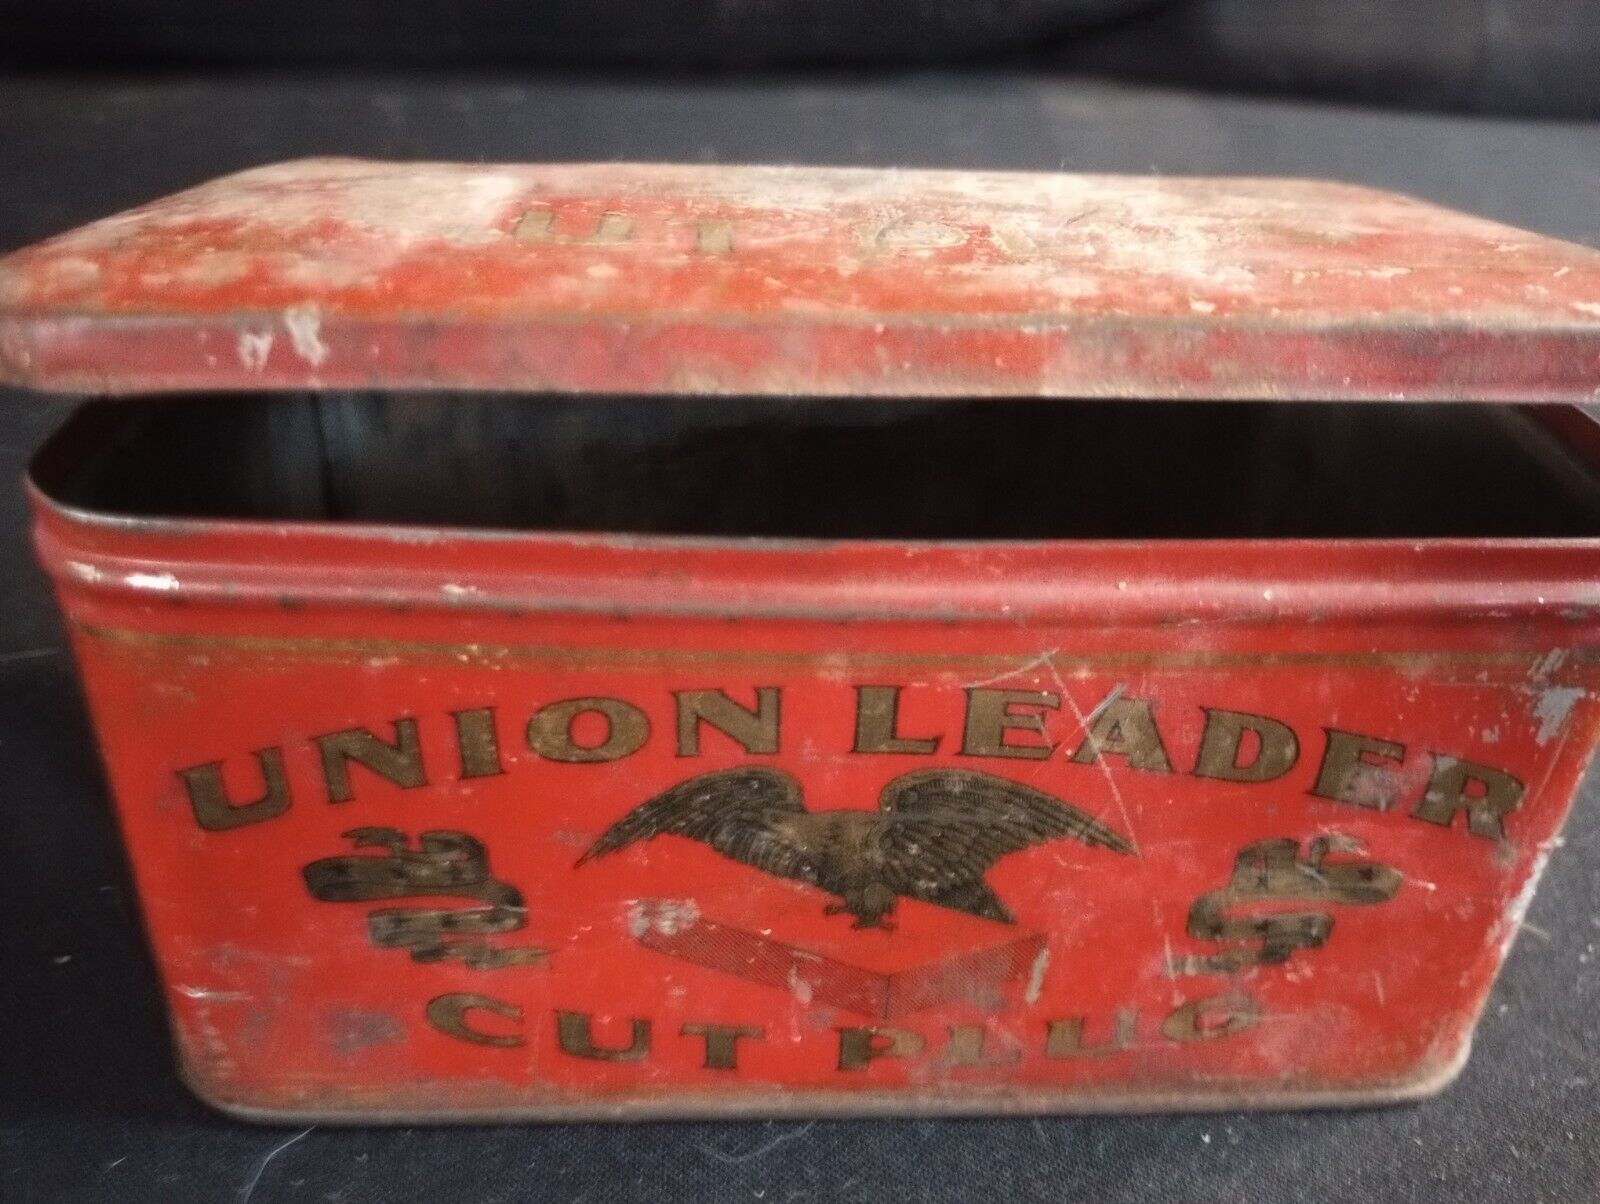 Vintage Antique Union Leader Cut Plug Tobacco Tin Can Red Gold Eagle Collectible